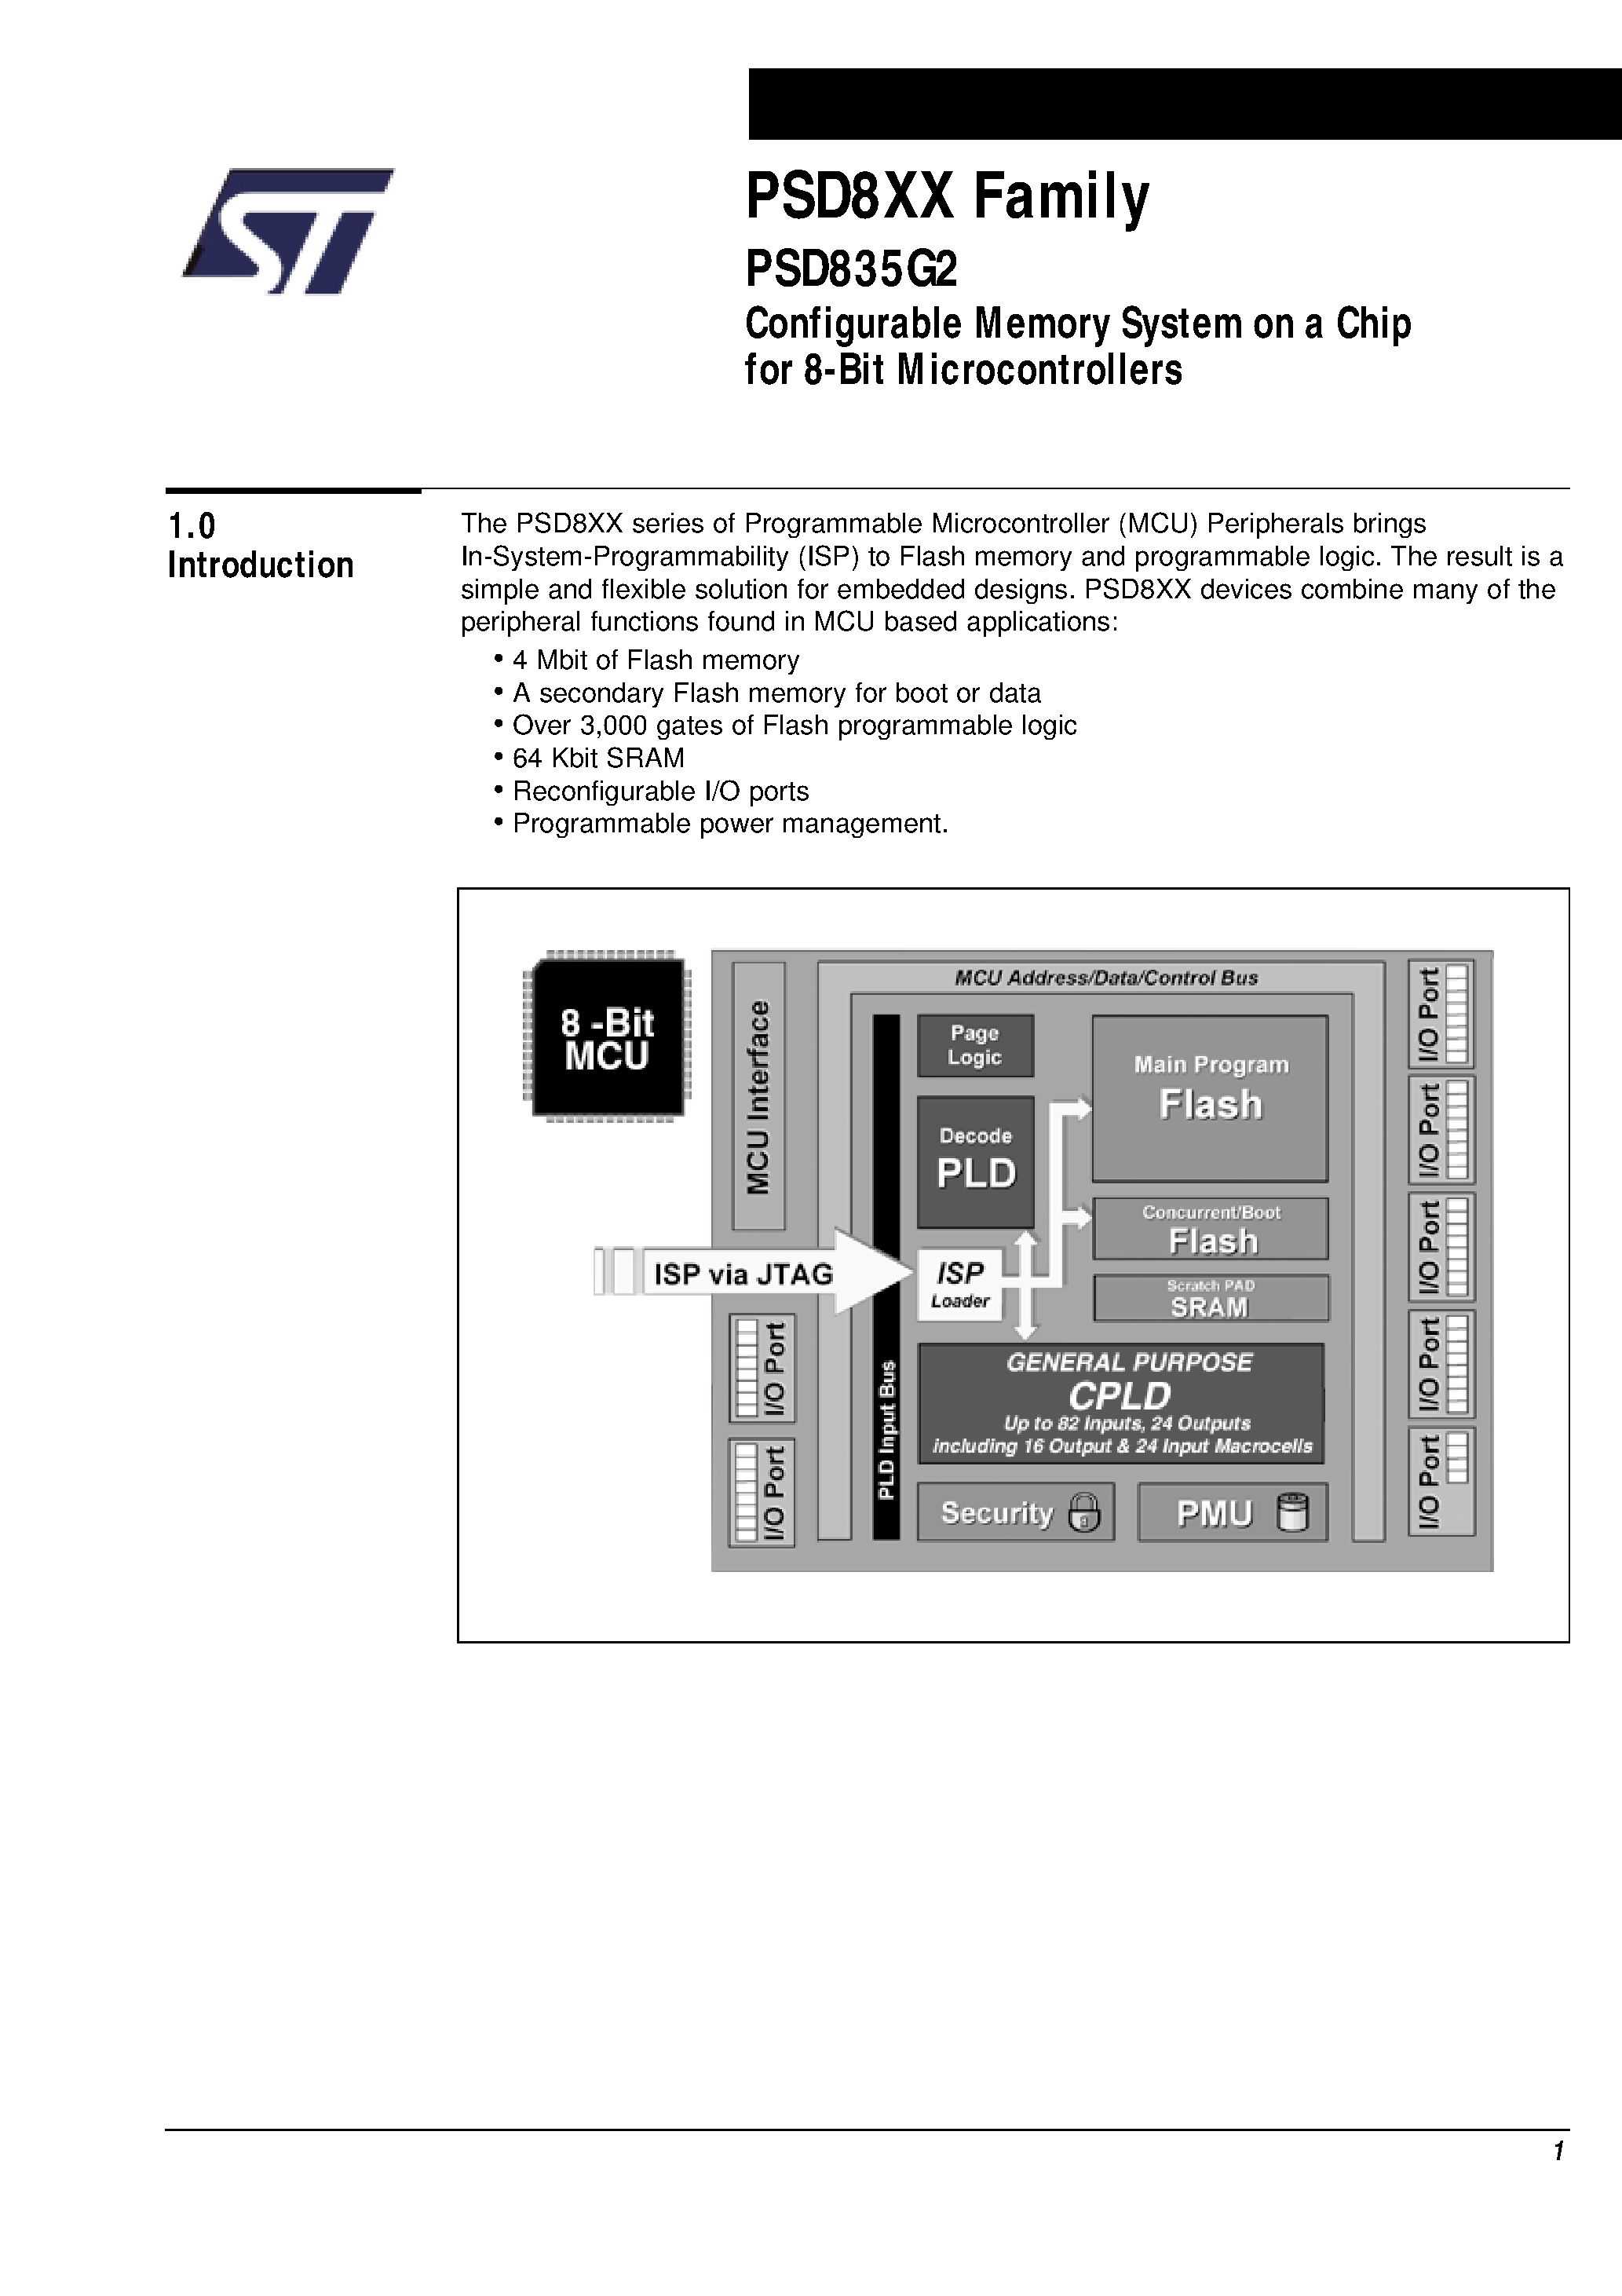 Datasheet PSD835F2V-A-20JI - Configurable Memory System on a Chip for 8-Bit Microcontrollers page 2